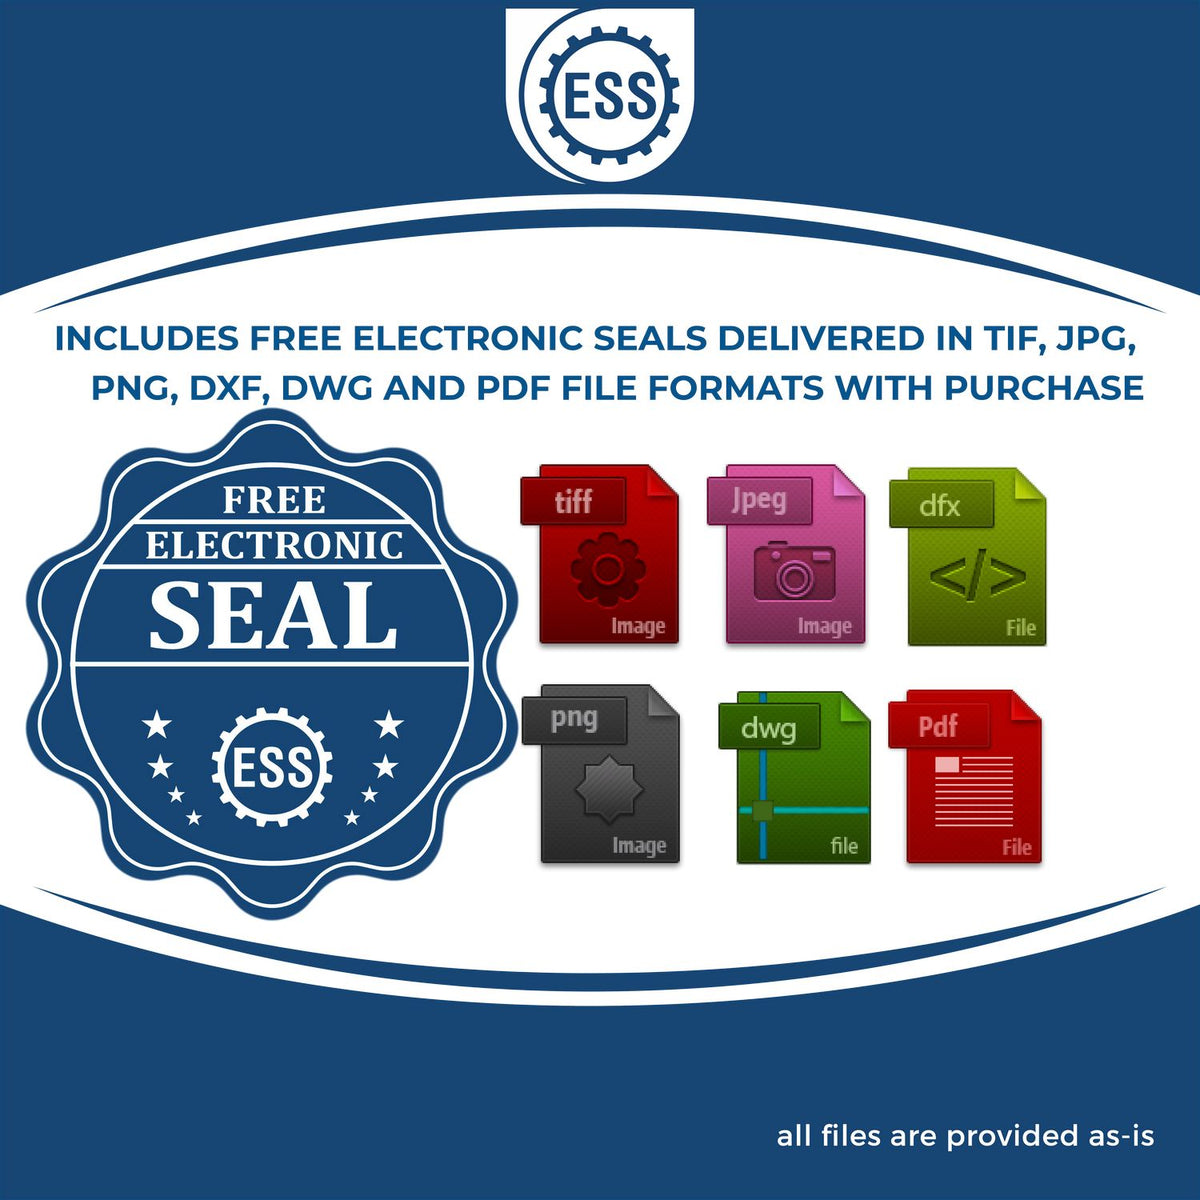 An infographic for the free electronic seal for the Wooden Handle Oregon Rectangular Notary Public Stamp illustrating the different file type icons such as DXF, DWG, TIF, JPG and PNG.